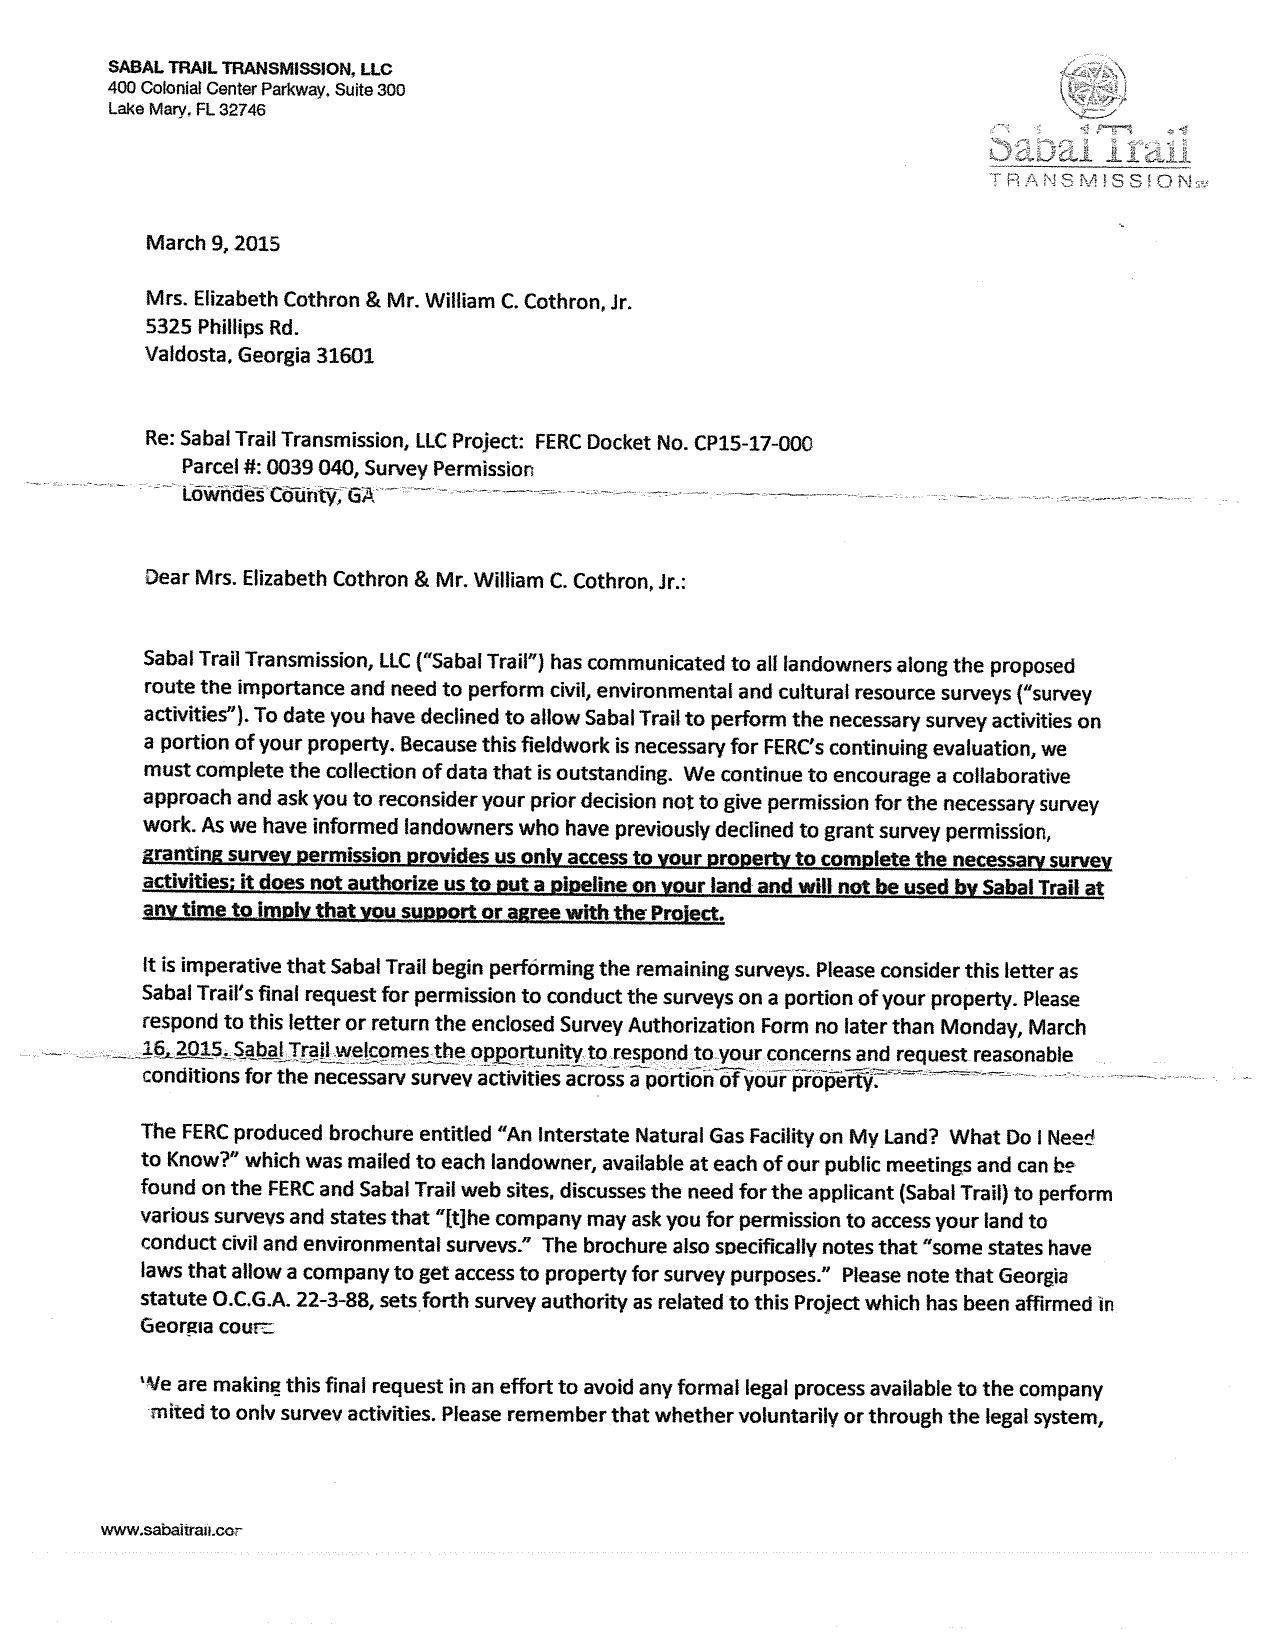 1275x1650 Final request, in Eminent domain final notice from Sabal Trail, by John S. Quarterman, for SpectraBusters.org, 9 March 2015